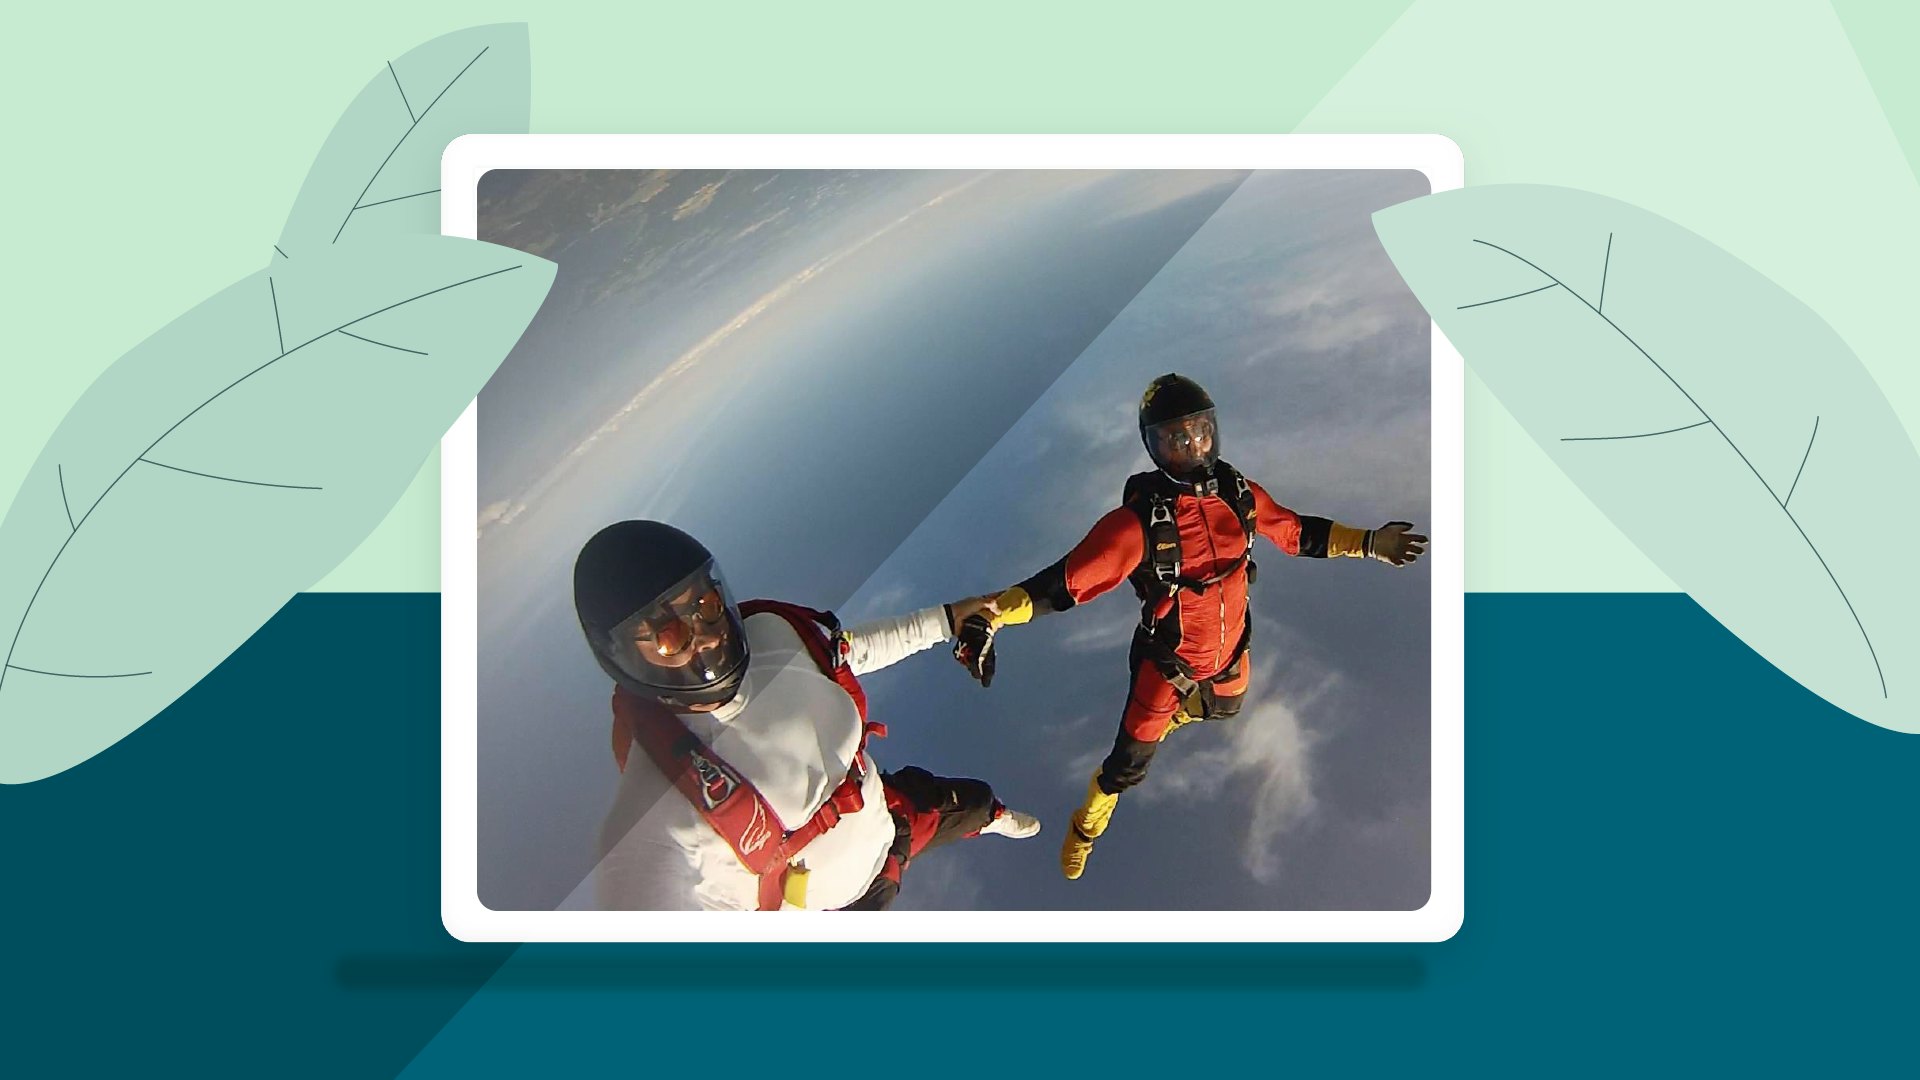 Two people skydiving holding hands.